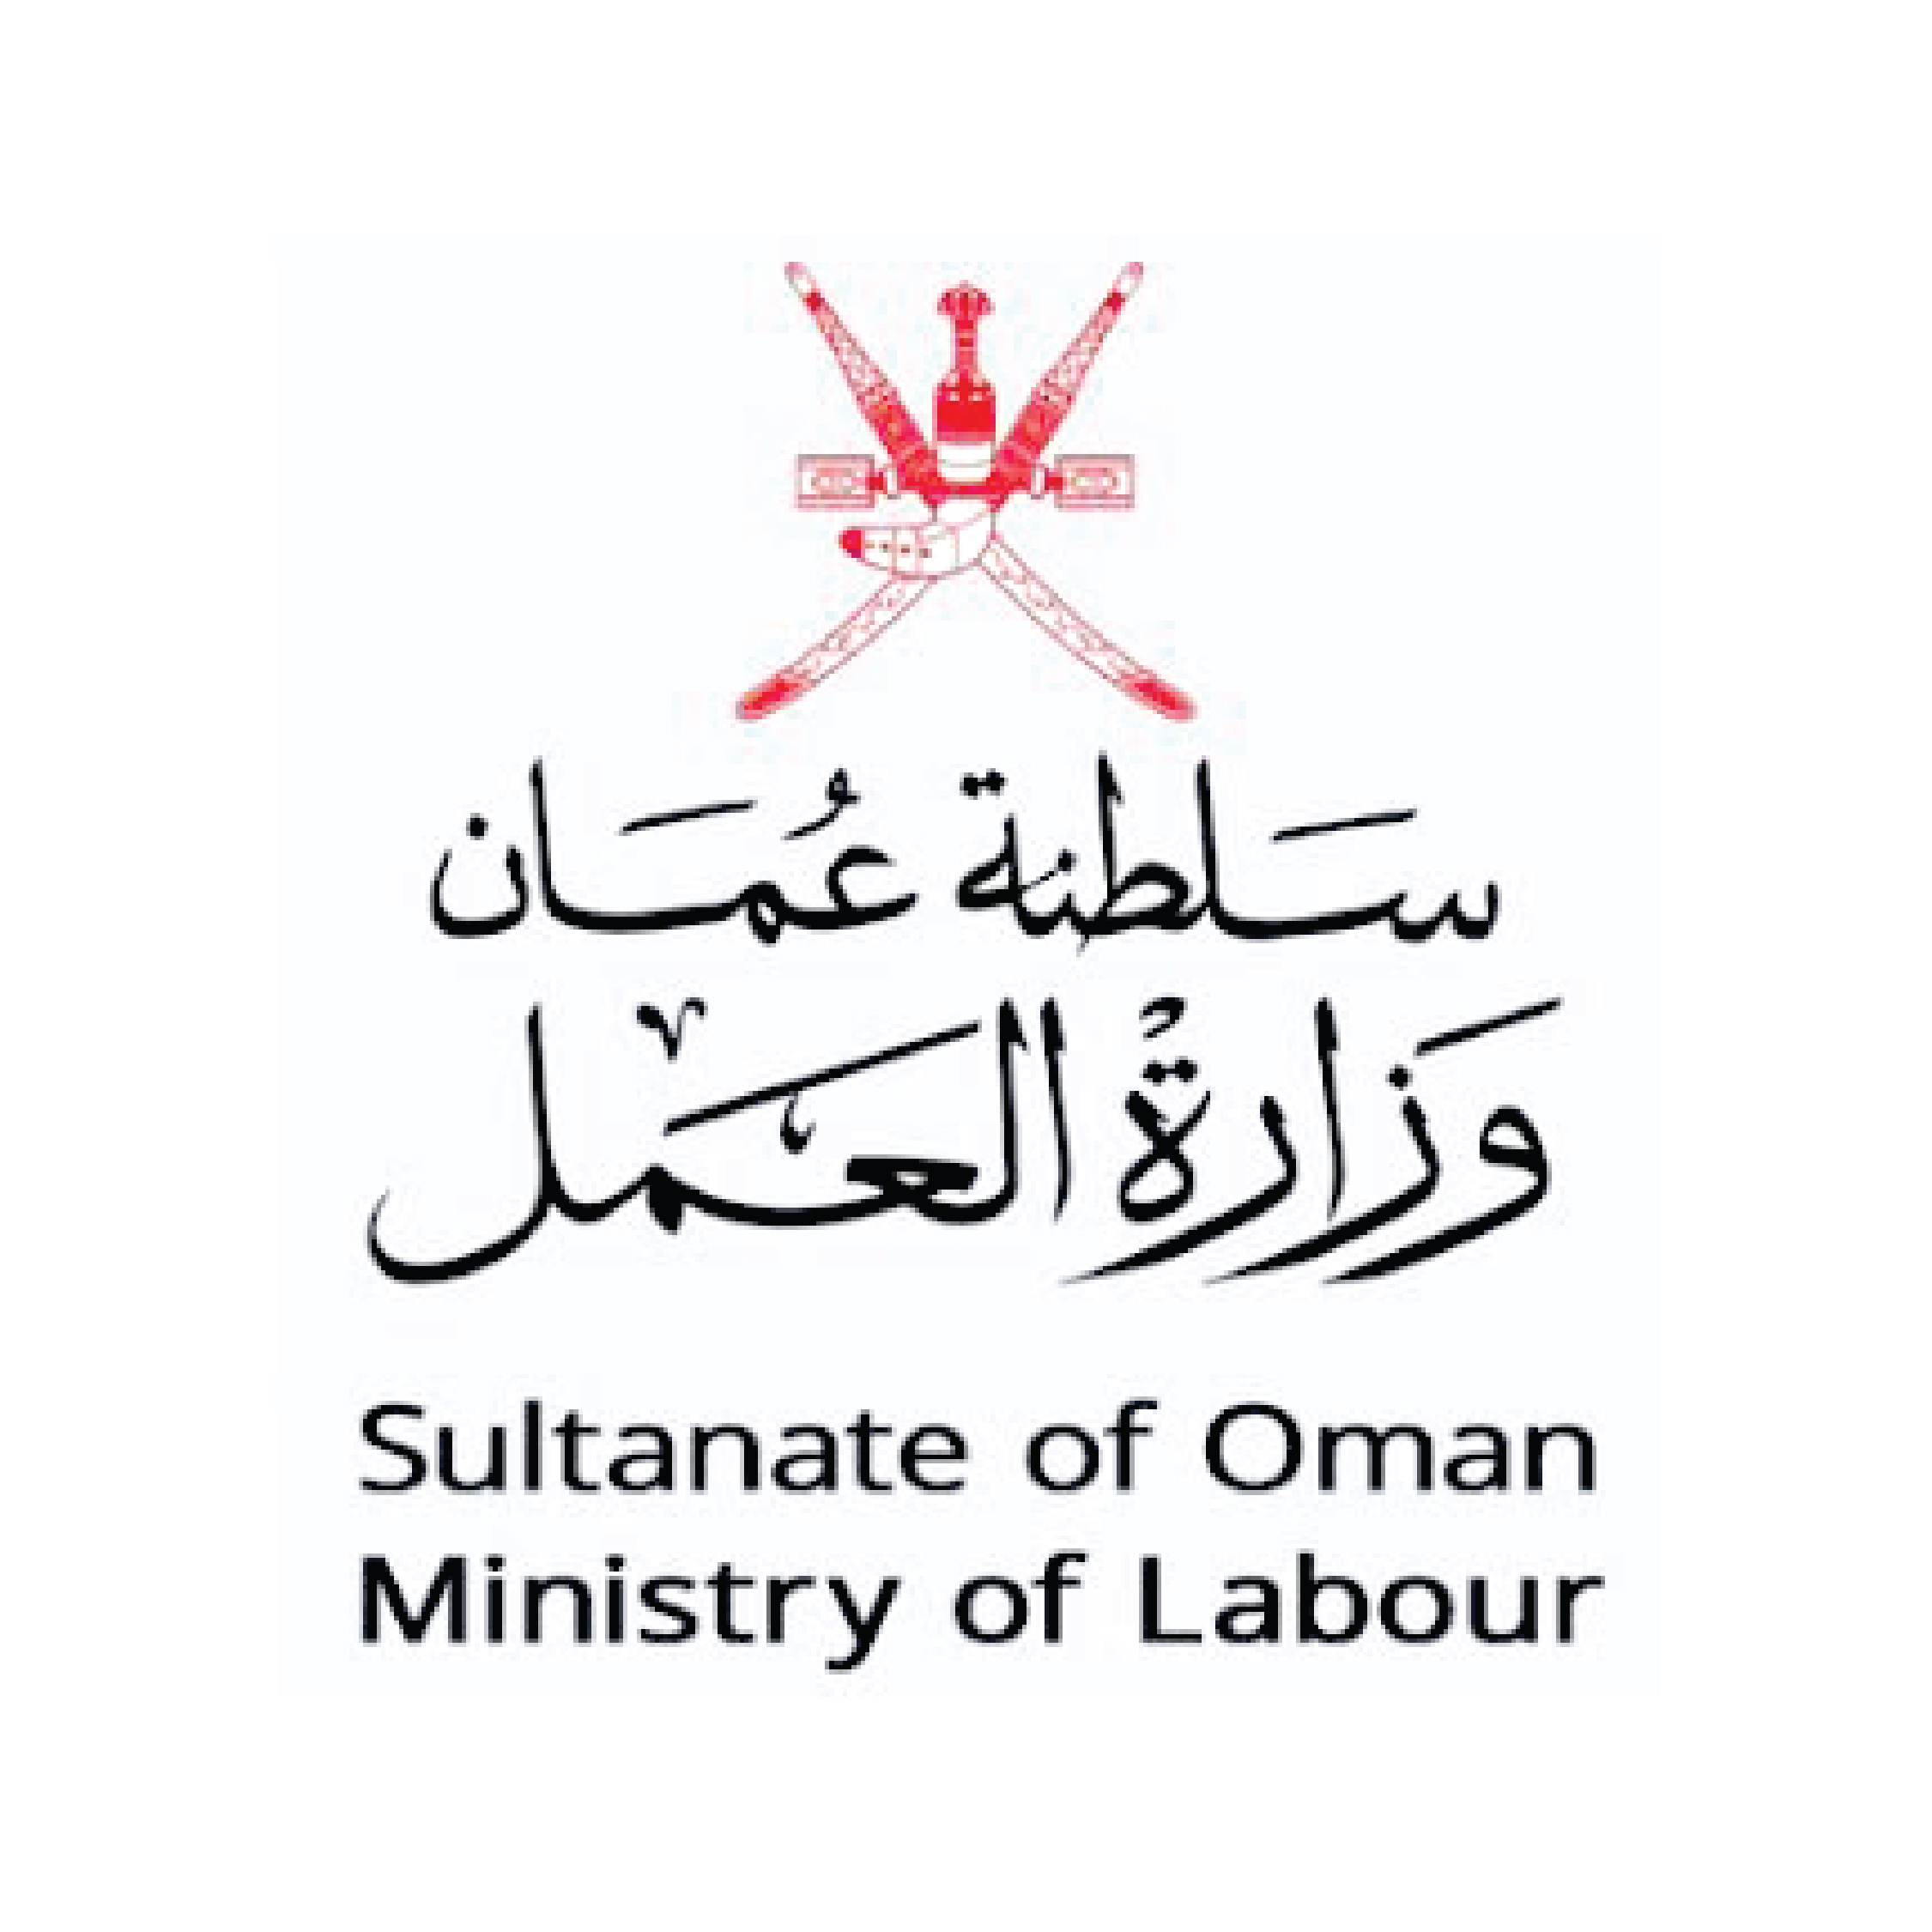 ministry of labour